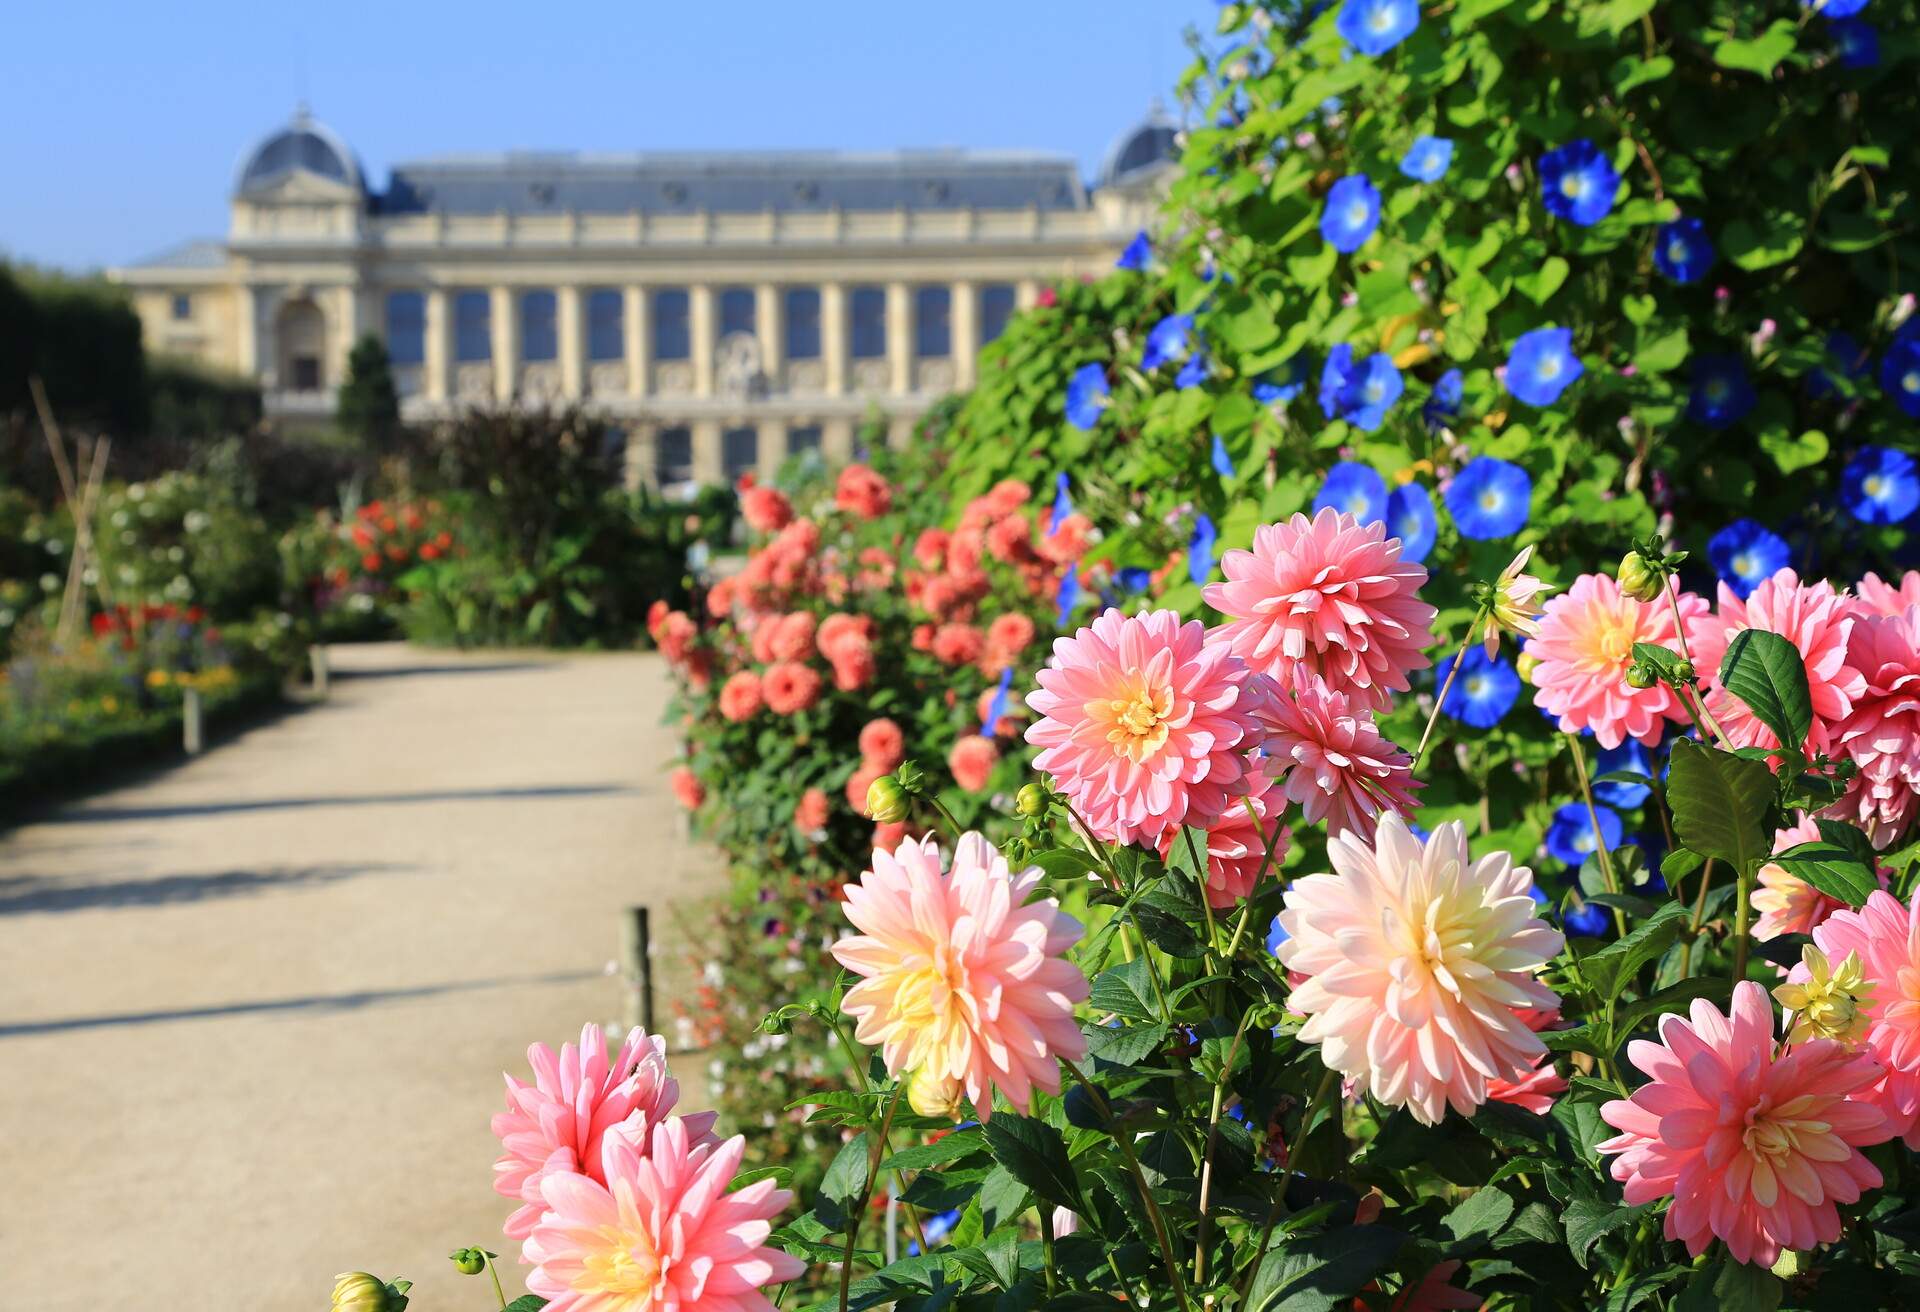 A closer look at some pink and yellow flowers in a park of Jardin des Plantes in Paris with an out of focus look at a beautiful french mansion in the background